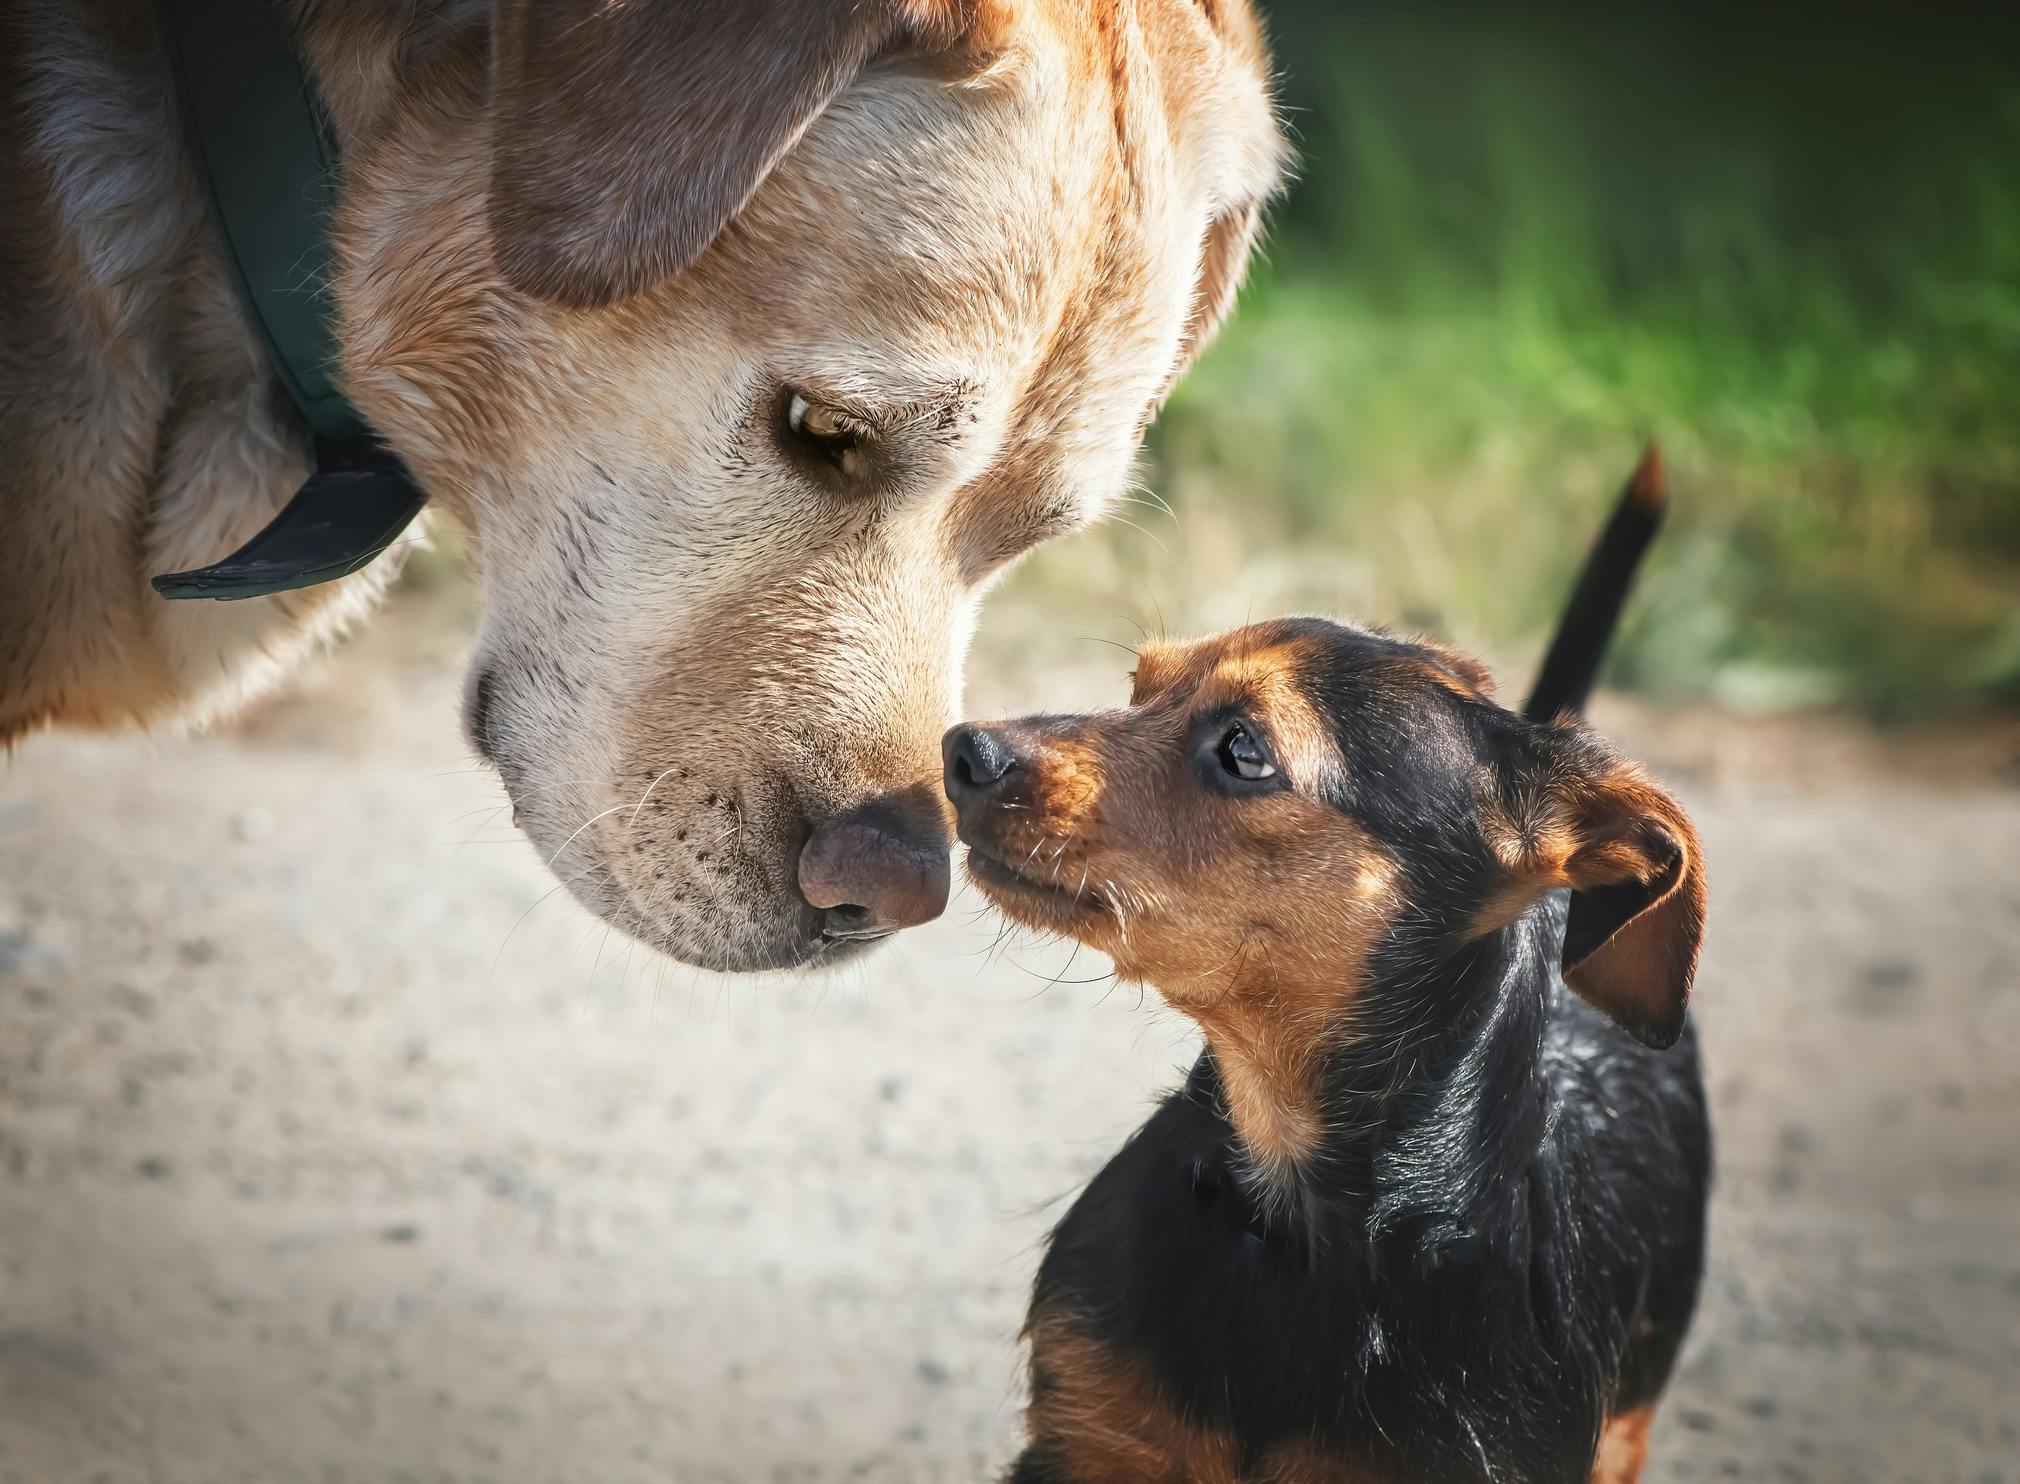 Large yellow dog sniffing a small black and brown dog.